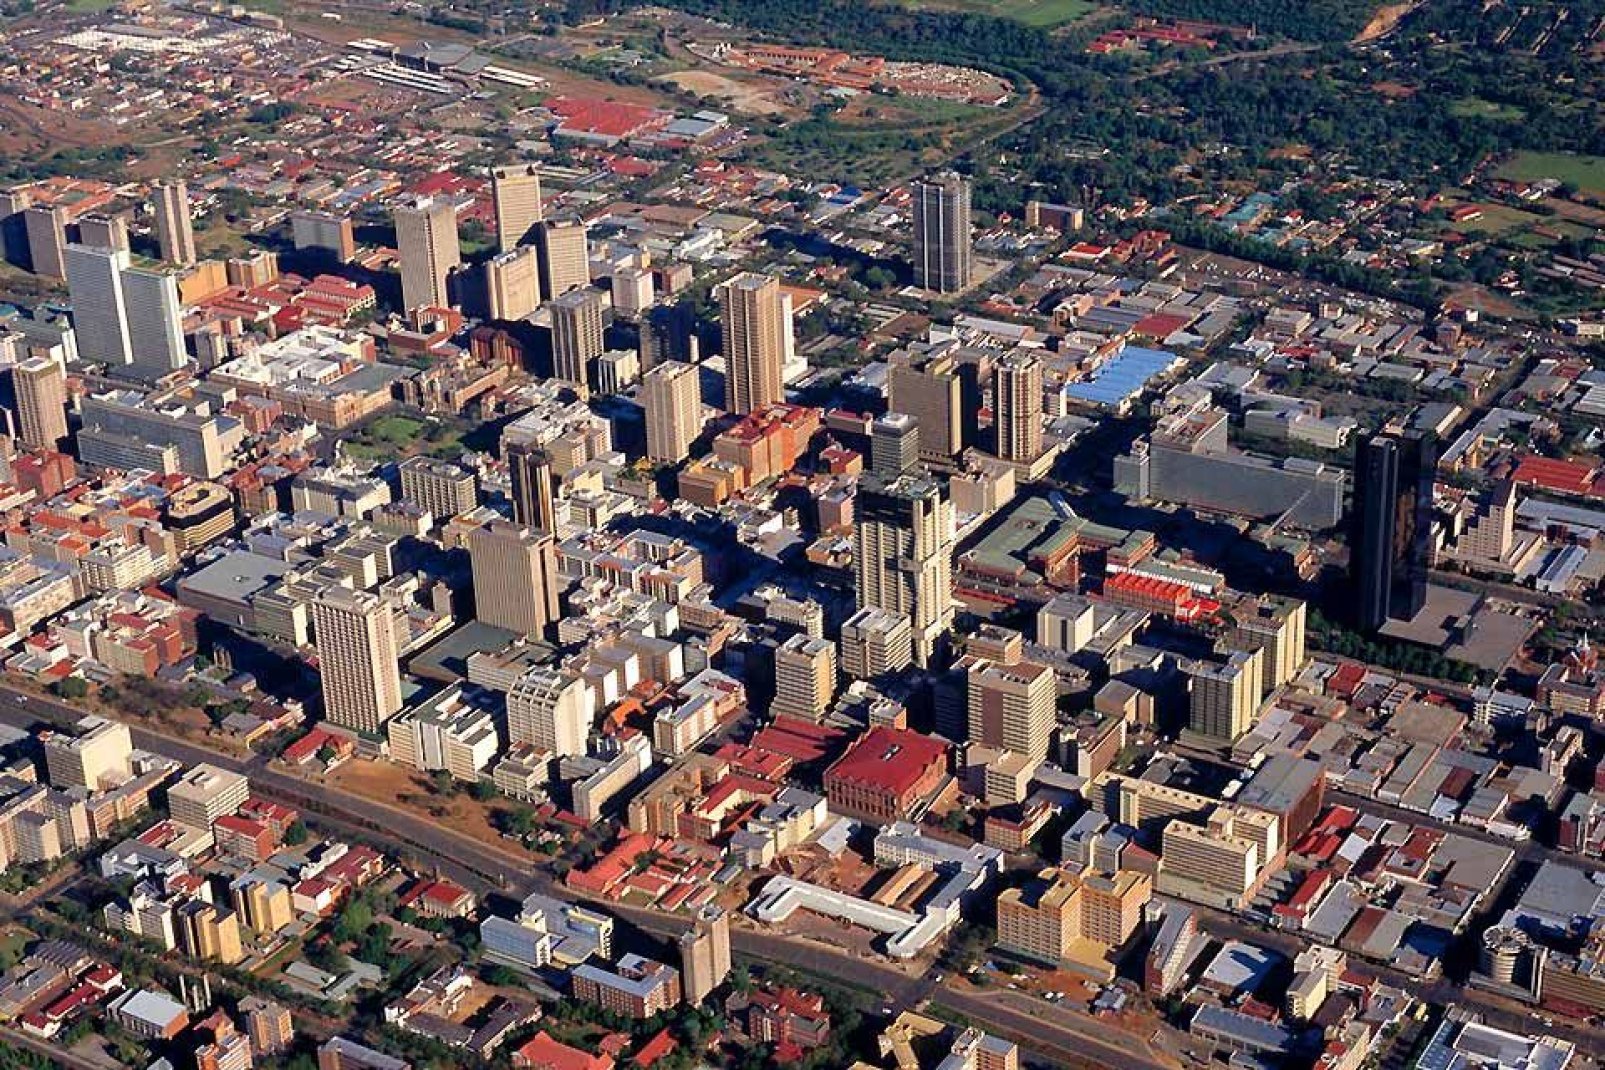 Pretoria is currently South Africa's political capital. Cape Town is the legislative capital and Bloemfontein the judicial capital.